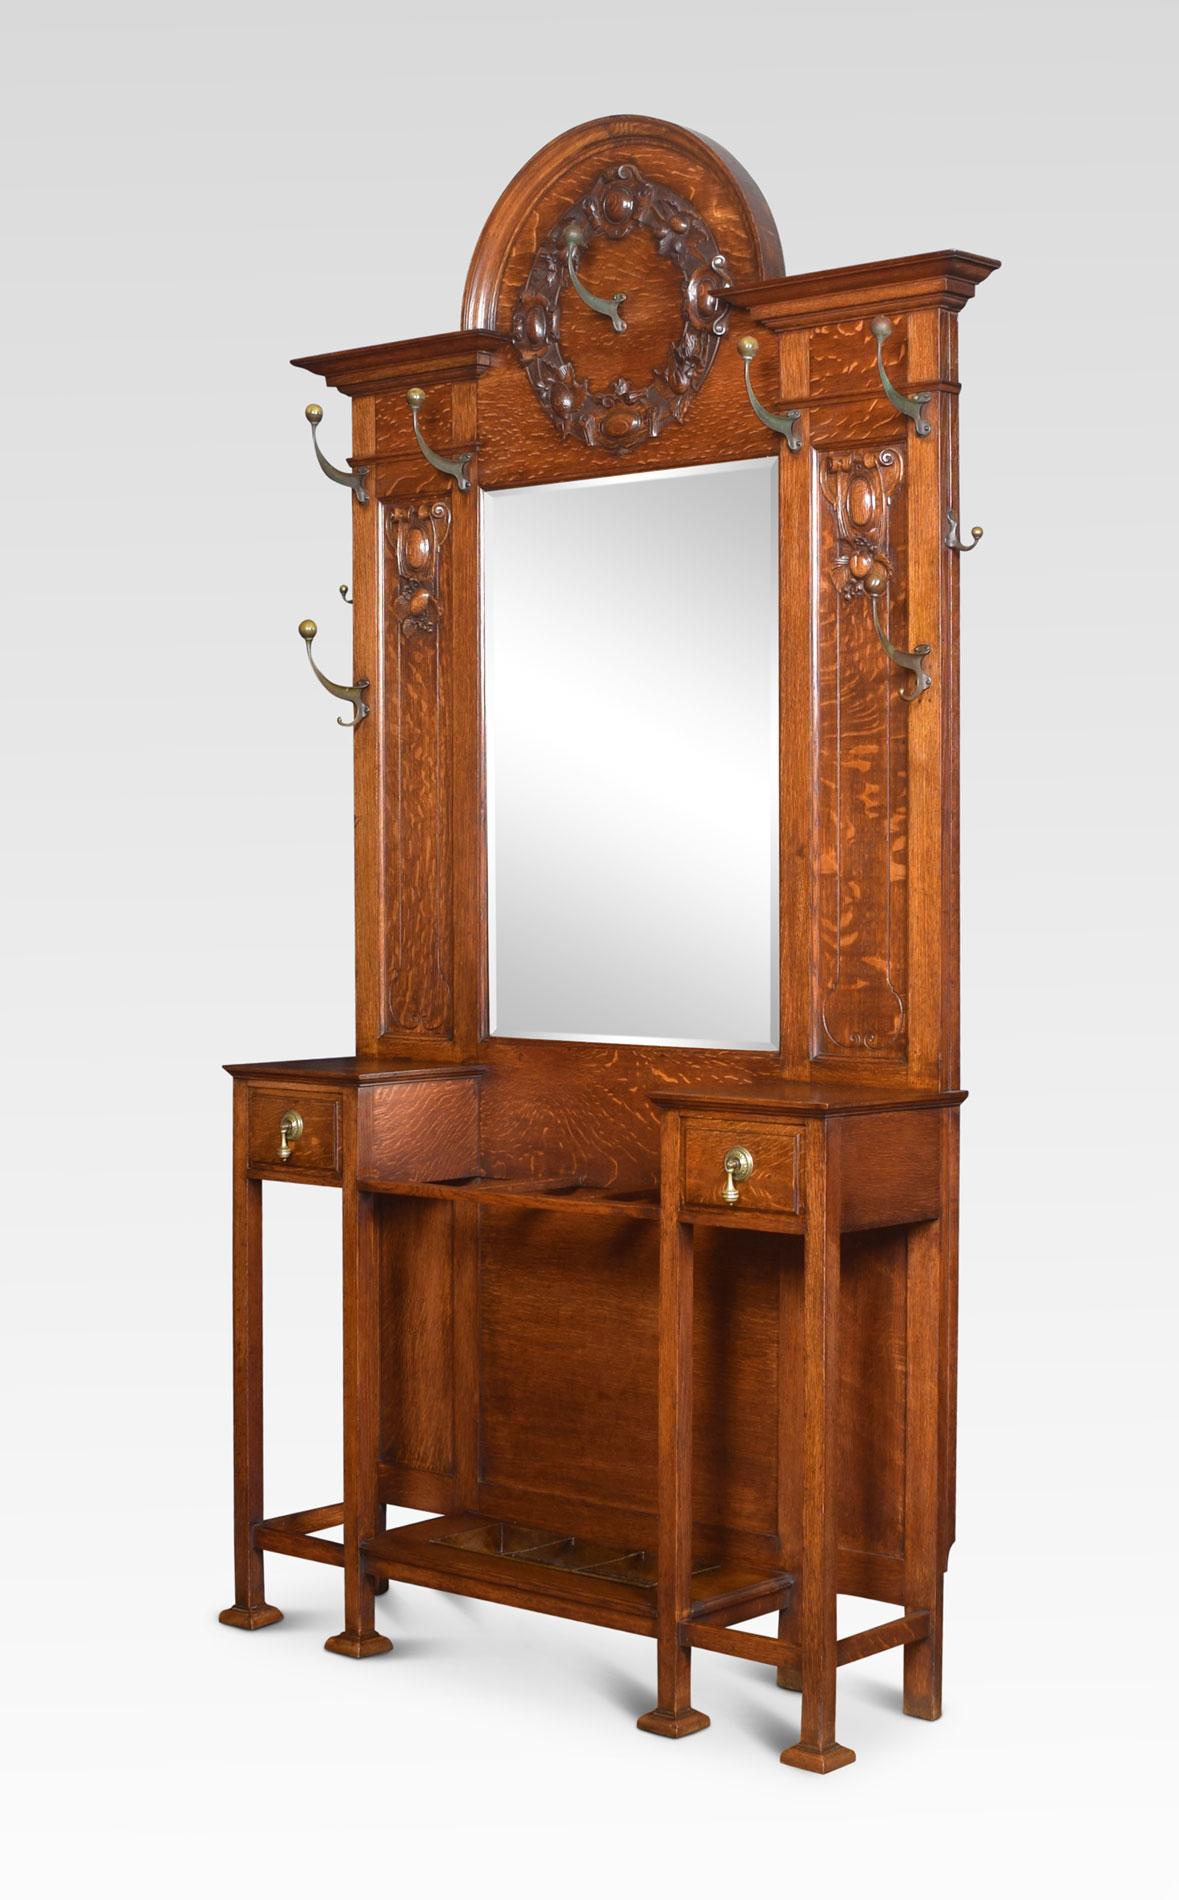 19th century oak hall stand the projecting cornice above the original bevelled mirror plate. Surrounded scrolling hooks. The base section fitted with two short drawers and a central umbrella stand with original drip trays. All raised up on tapering